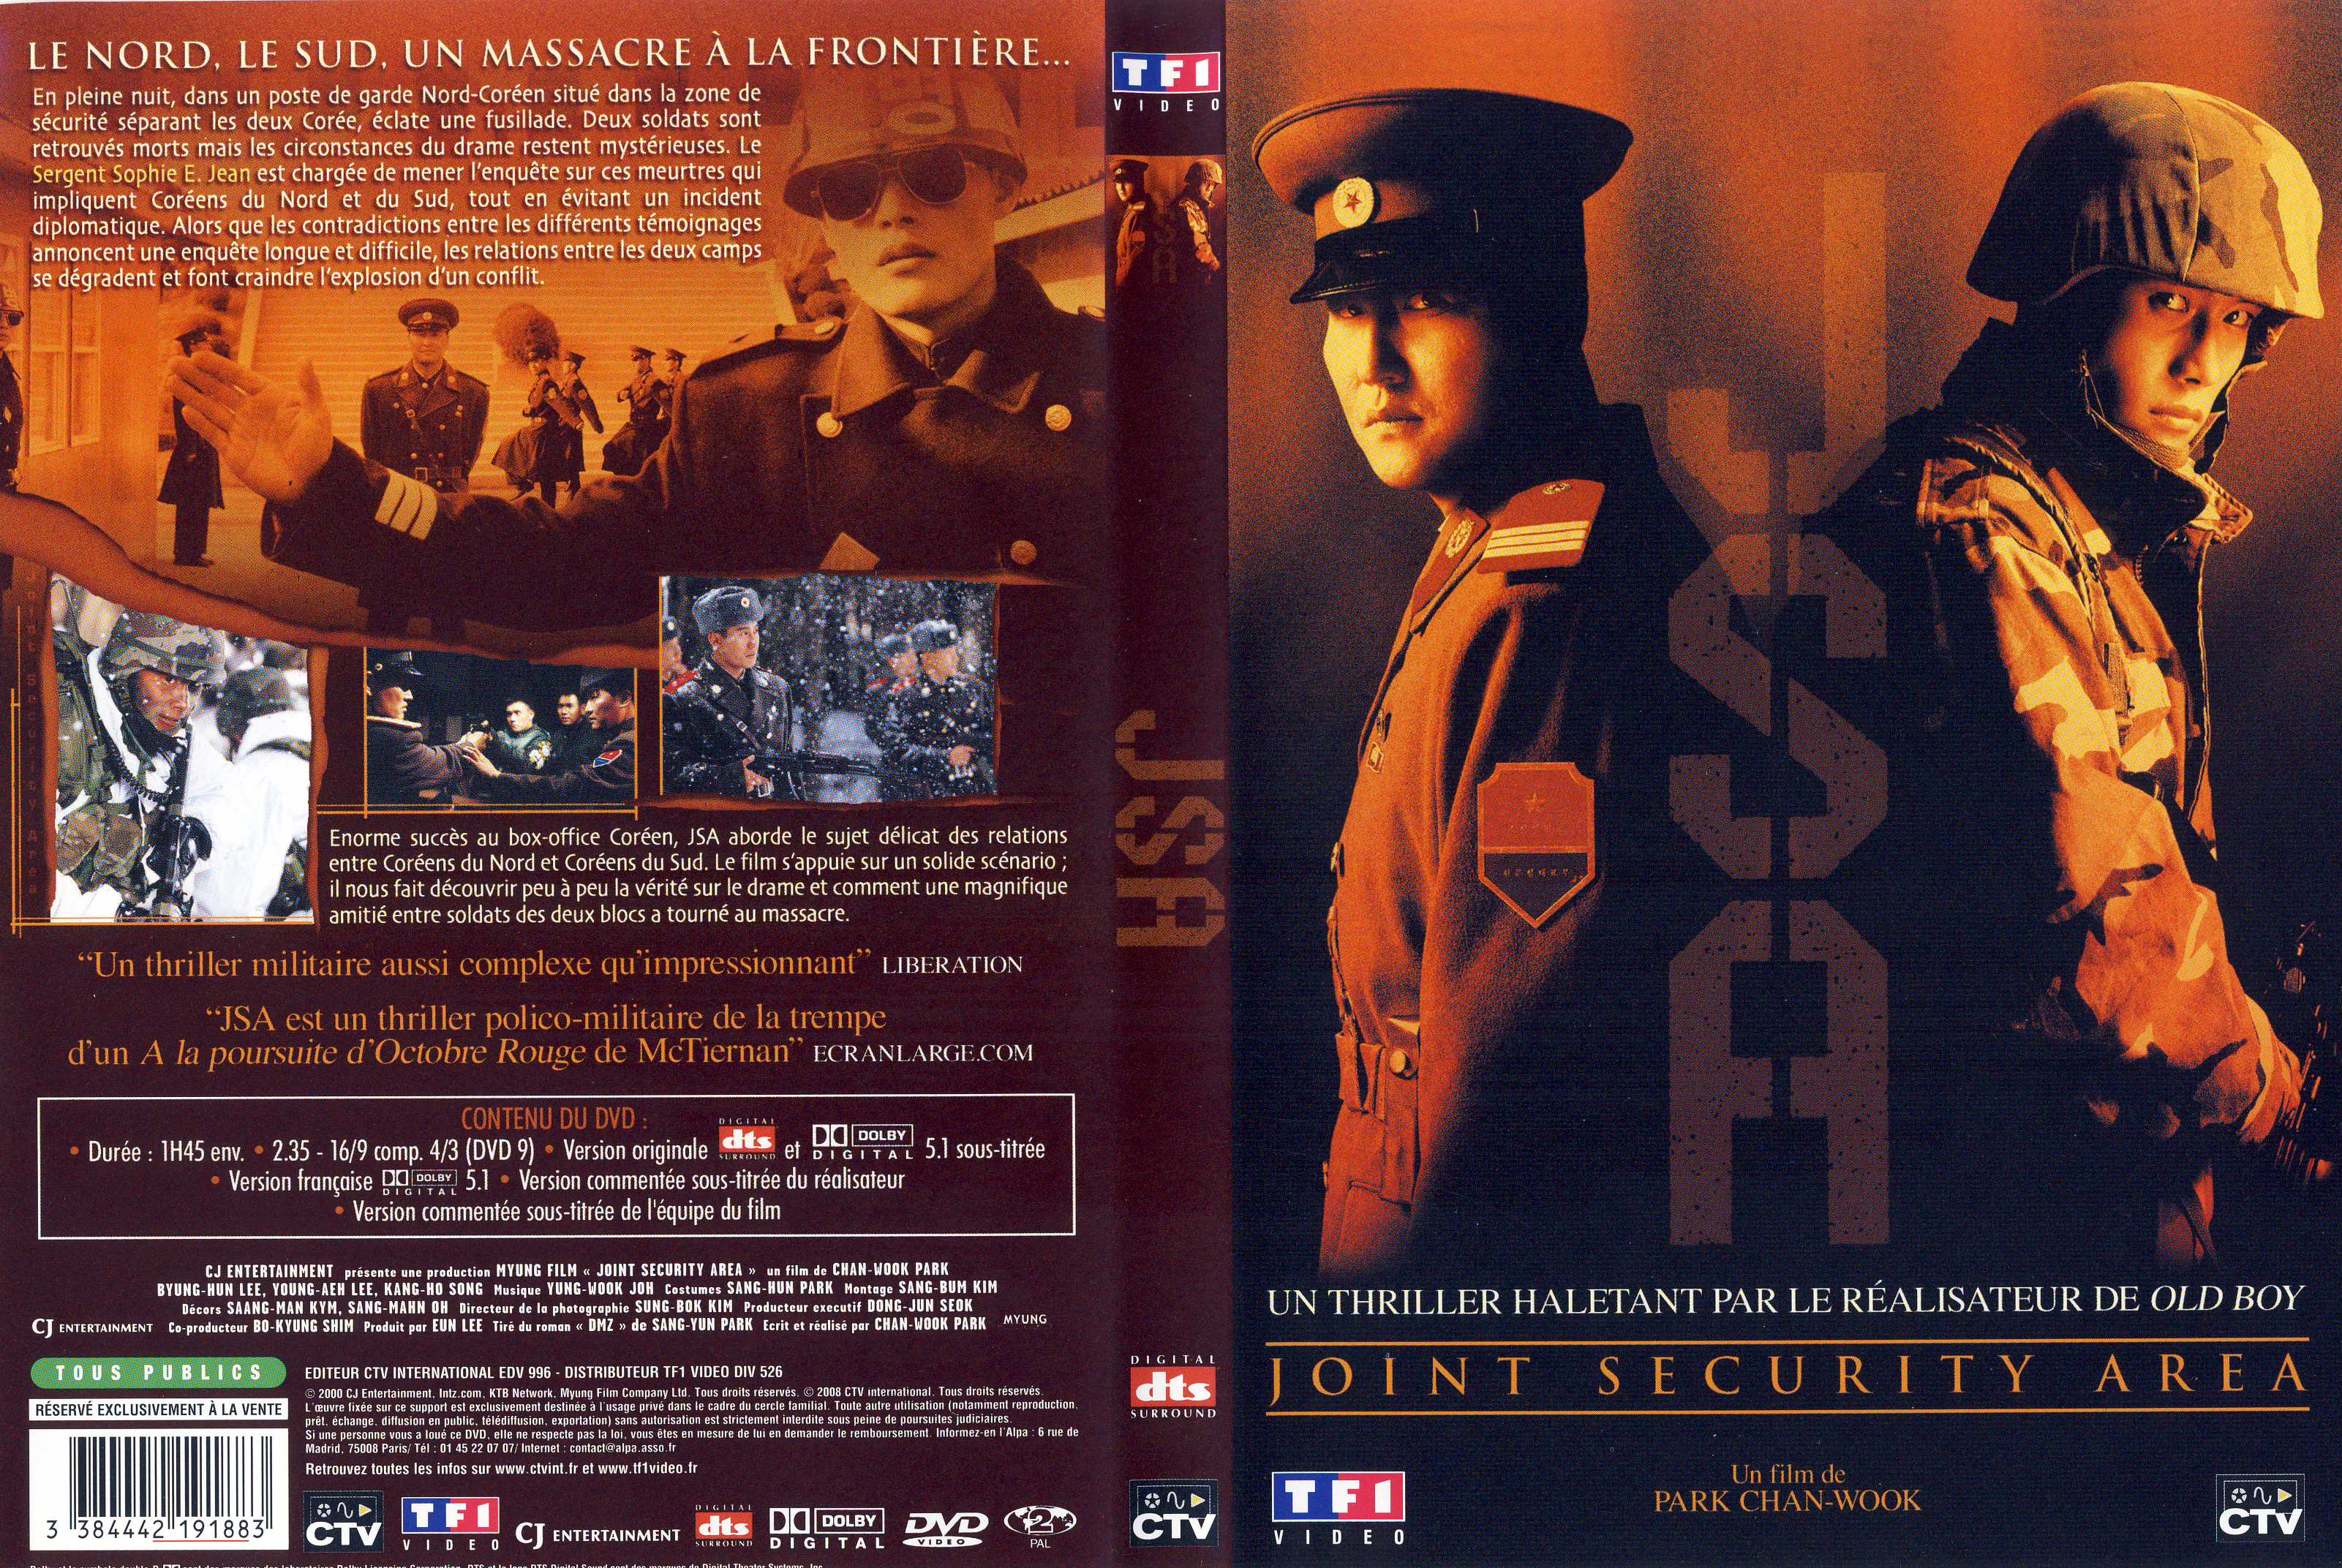 Jaquette DVD Joint security area v2